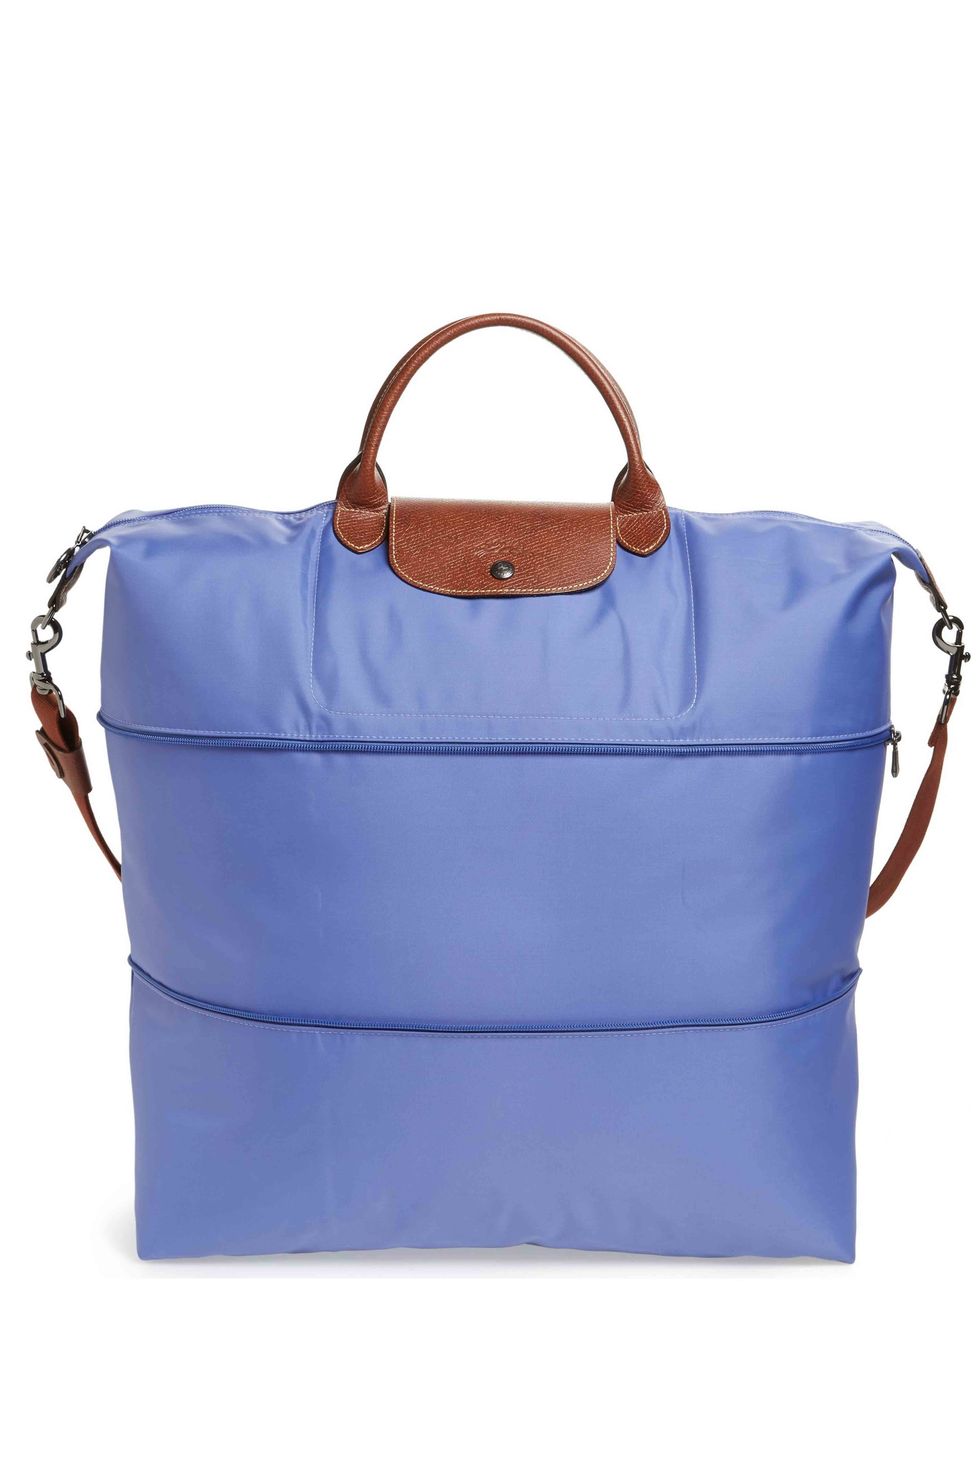 The Royal-Approved Longchamp Le Pliage Bag Is On Sale - PureWow